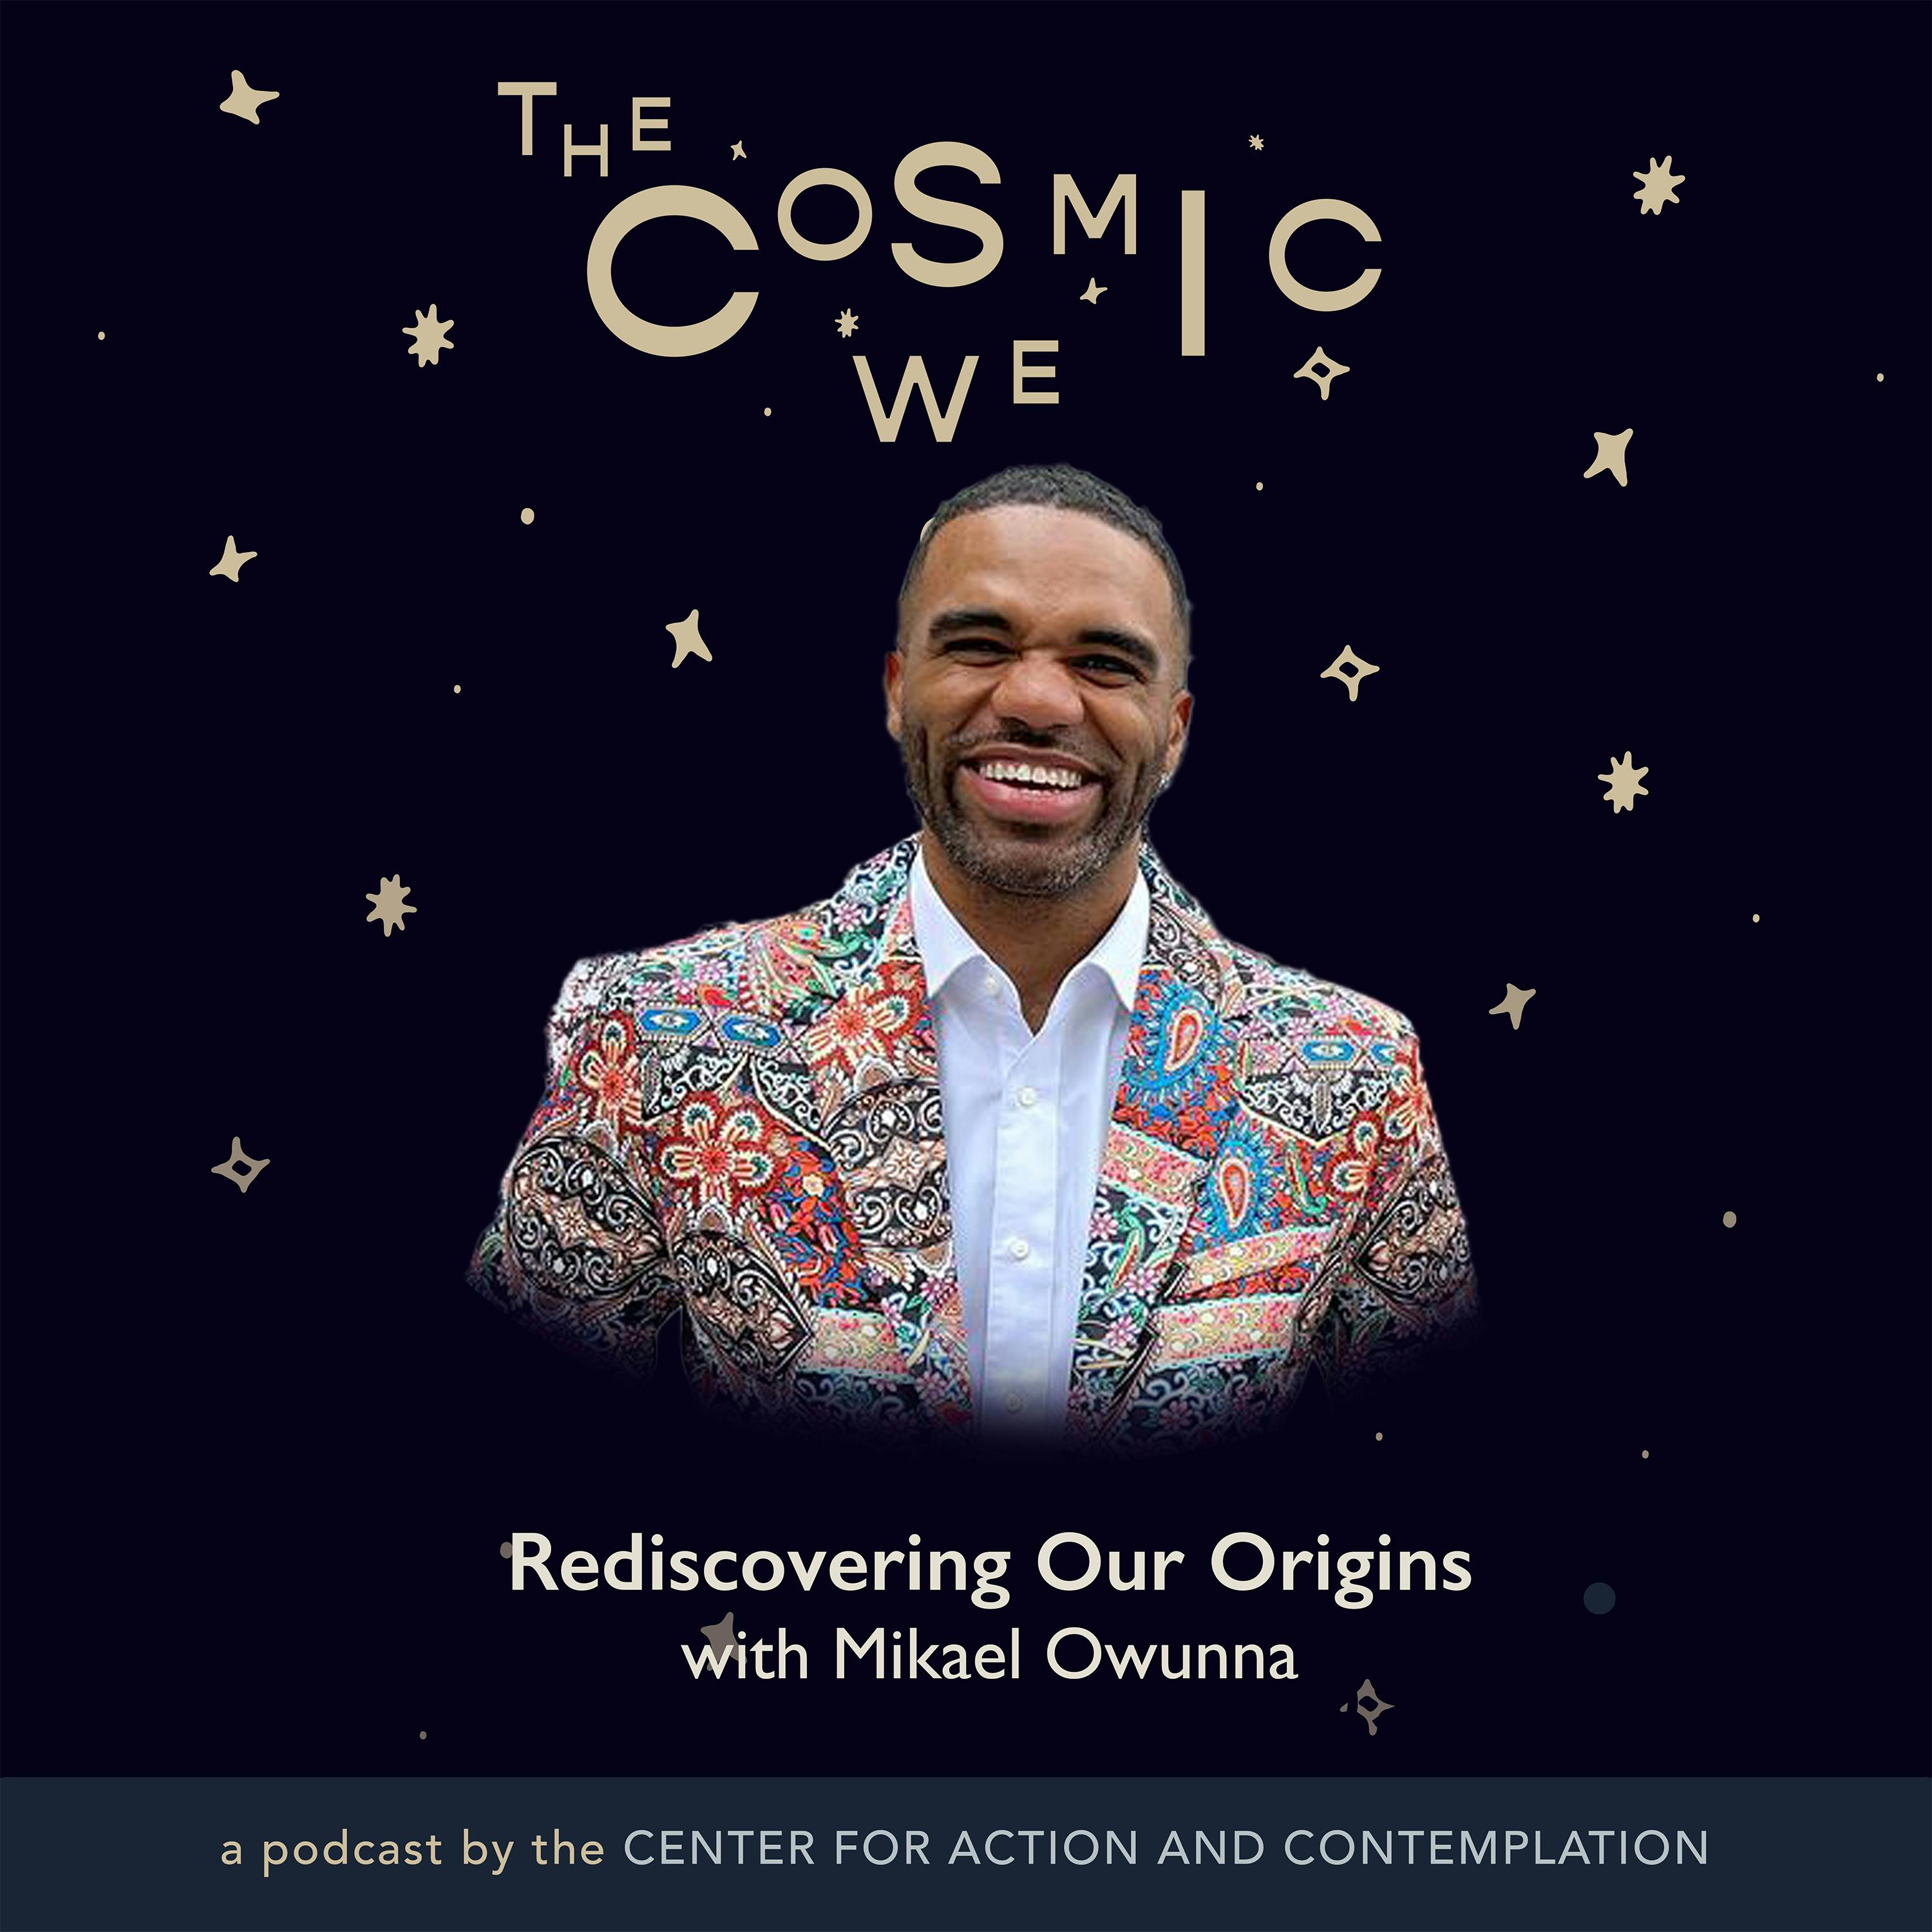 Rediscovering Our Origins with Mikael Owunna